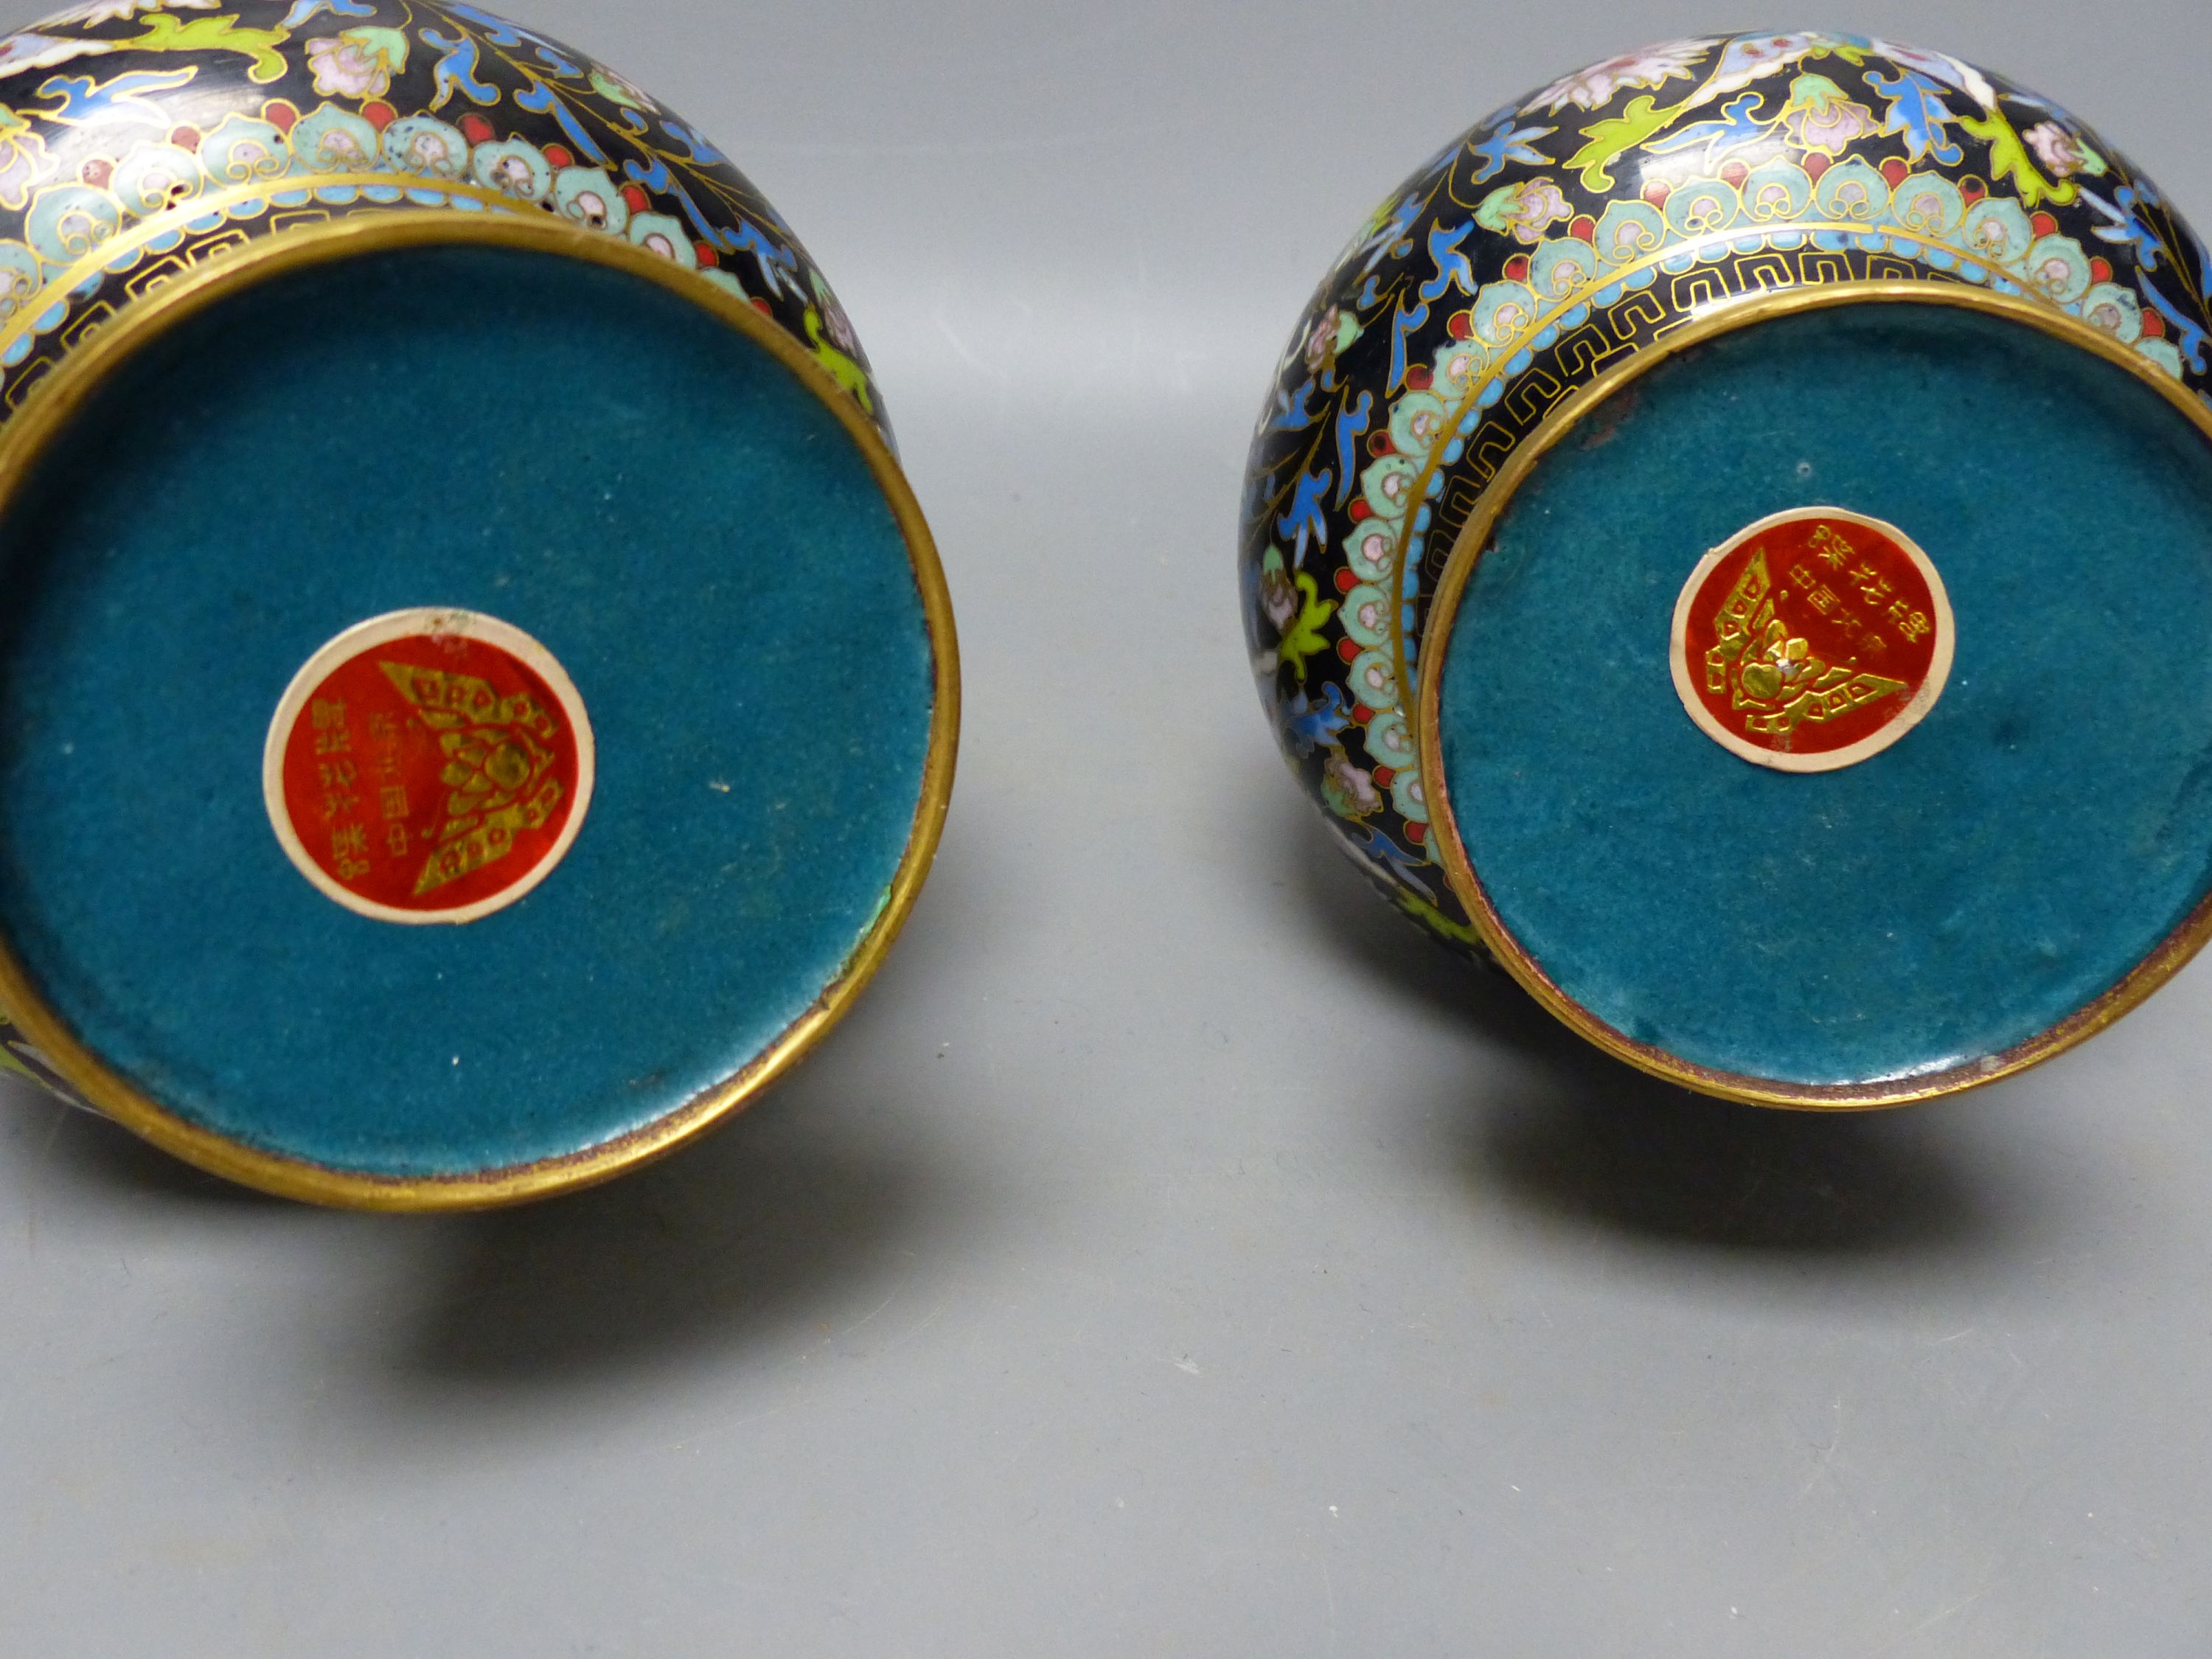 A pair of Chinese cloisonne enamel vases and other similar items, tallest 21cm (7)